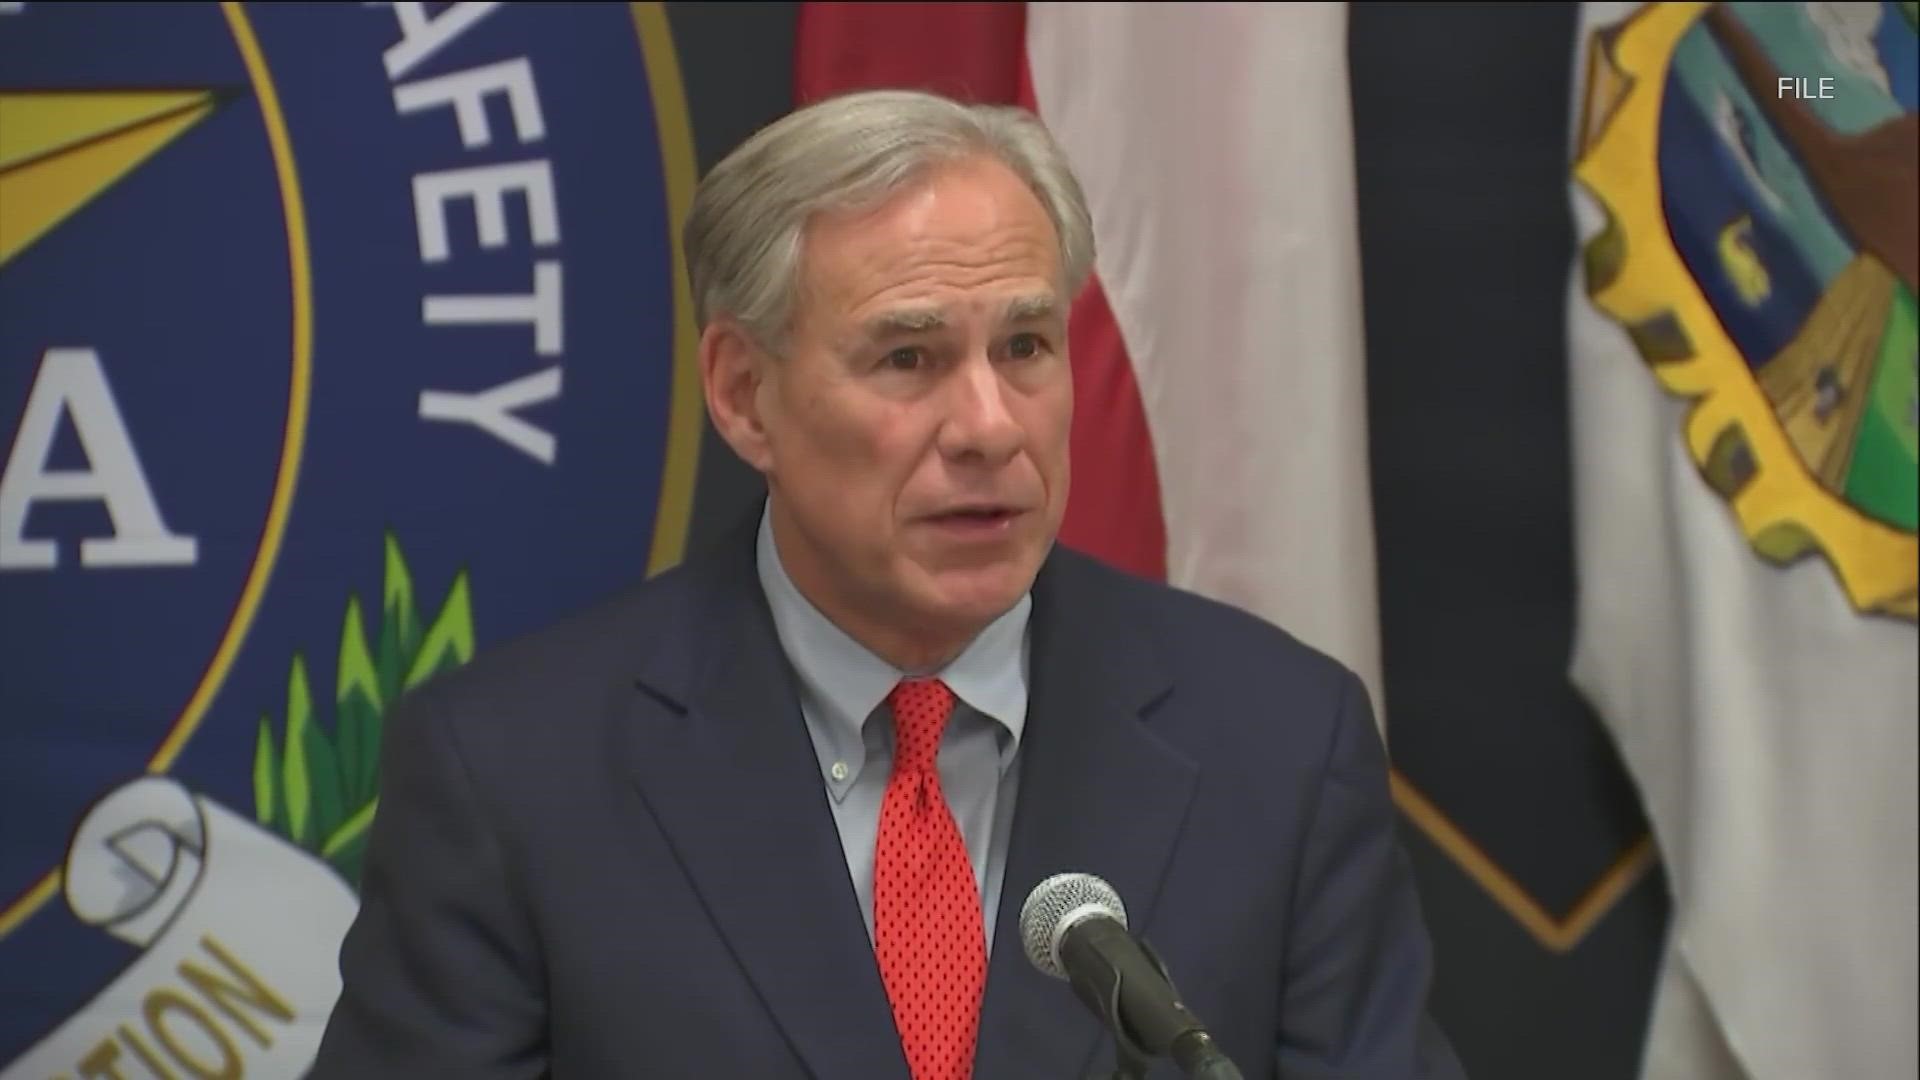 Gov. Greg Abbott is warning state agencies and public university leaders to stop considering diversity in hiring, saying it could be illegal.